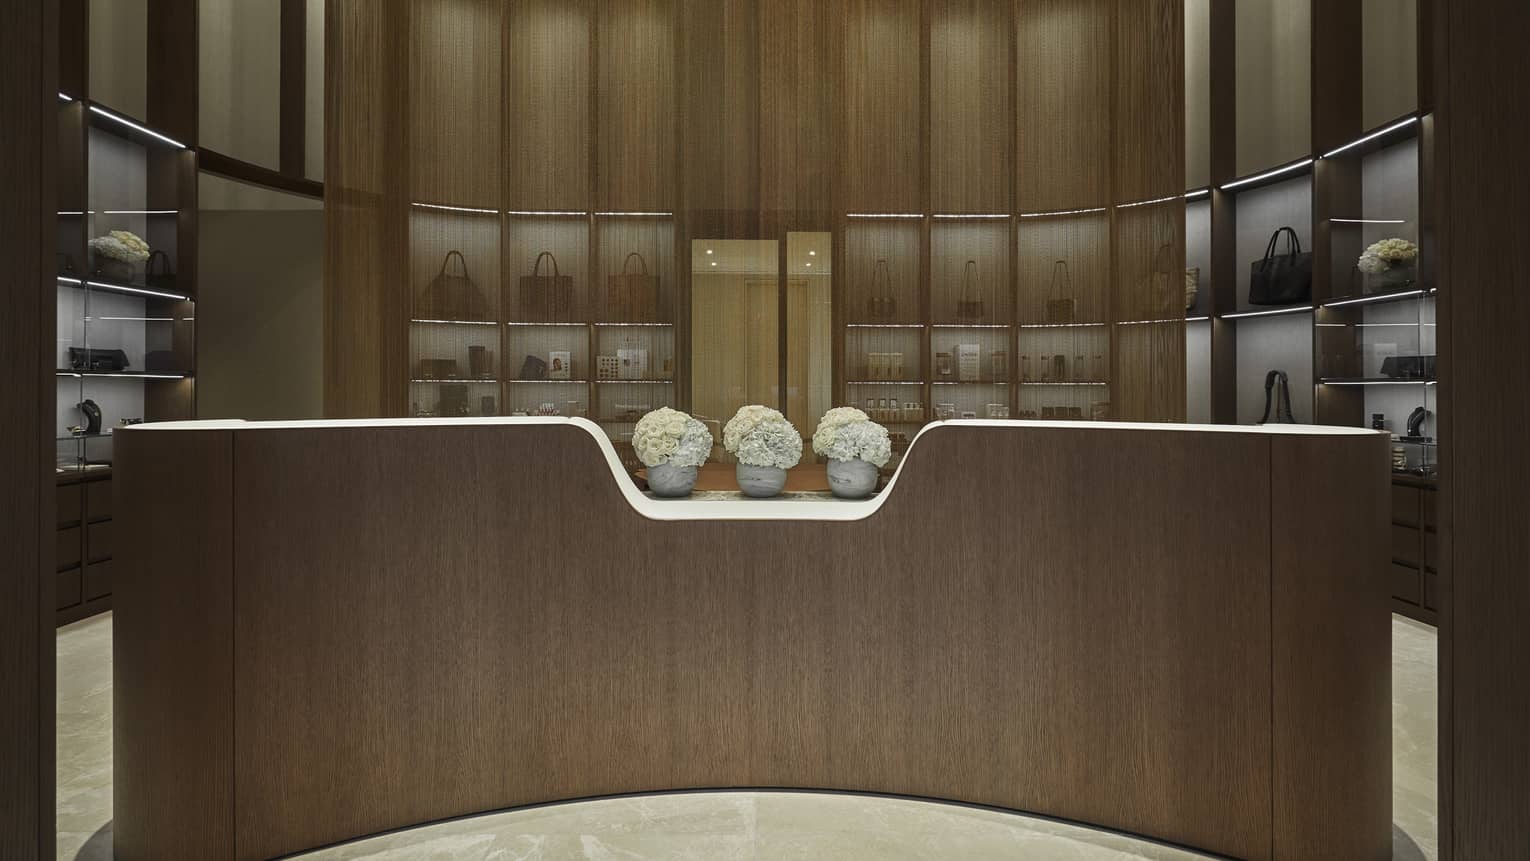 Entrance of the Spa boutique with three vases of white flowers.